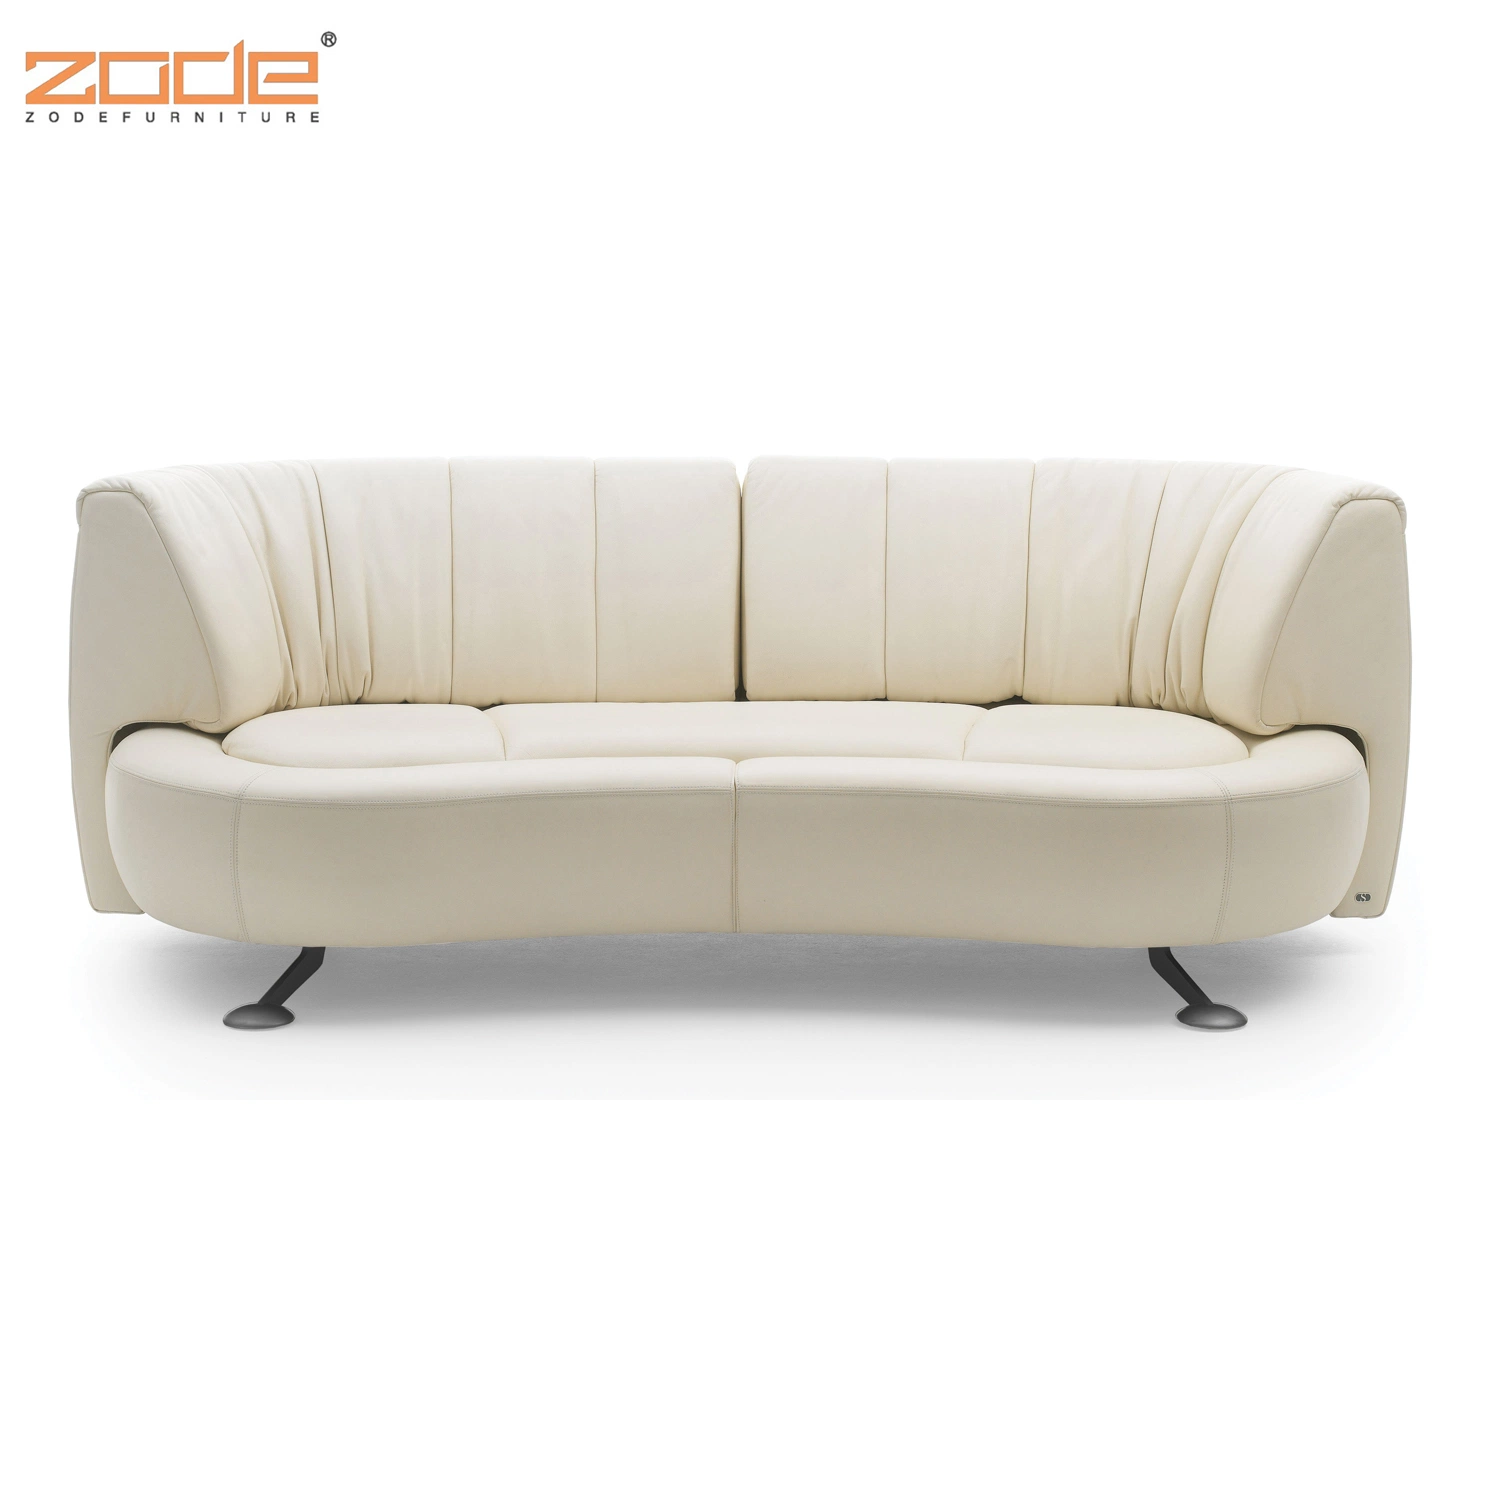 Zode Modern Home/Living Room/Office Design Furniture Luxury Sectional Synthetic Leather L Shape Furniture Living Room Sofa